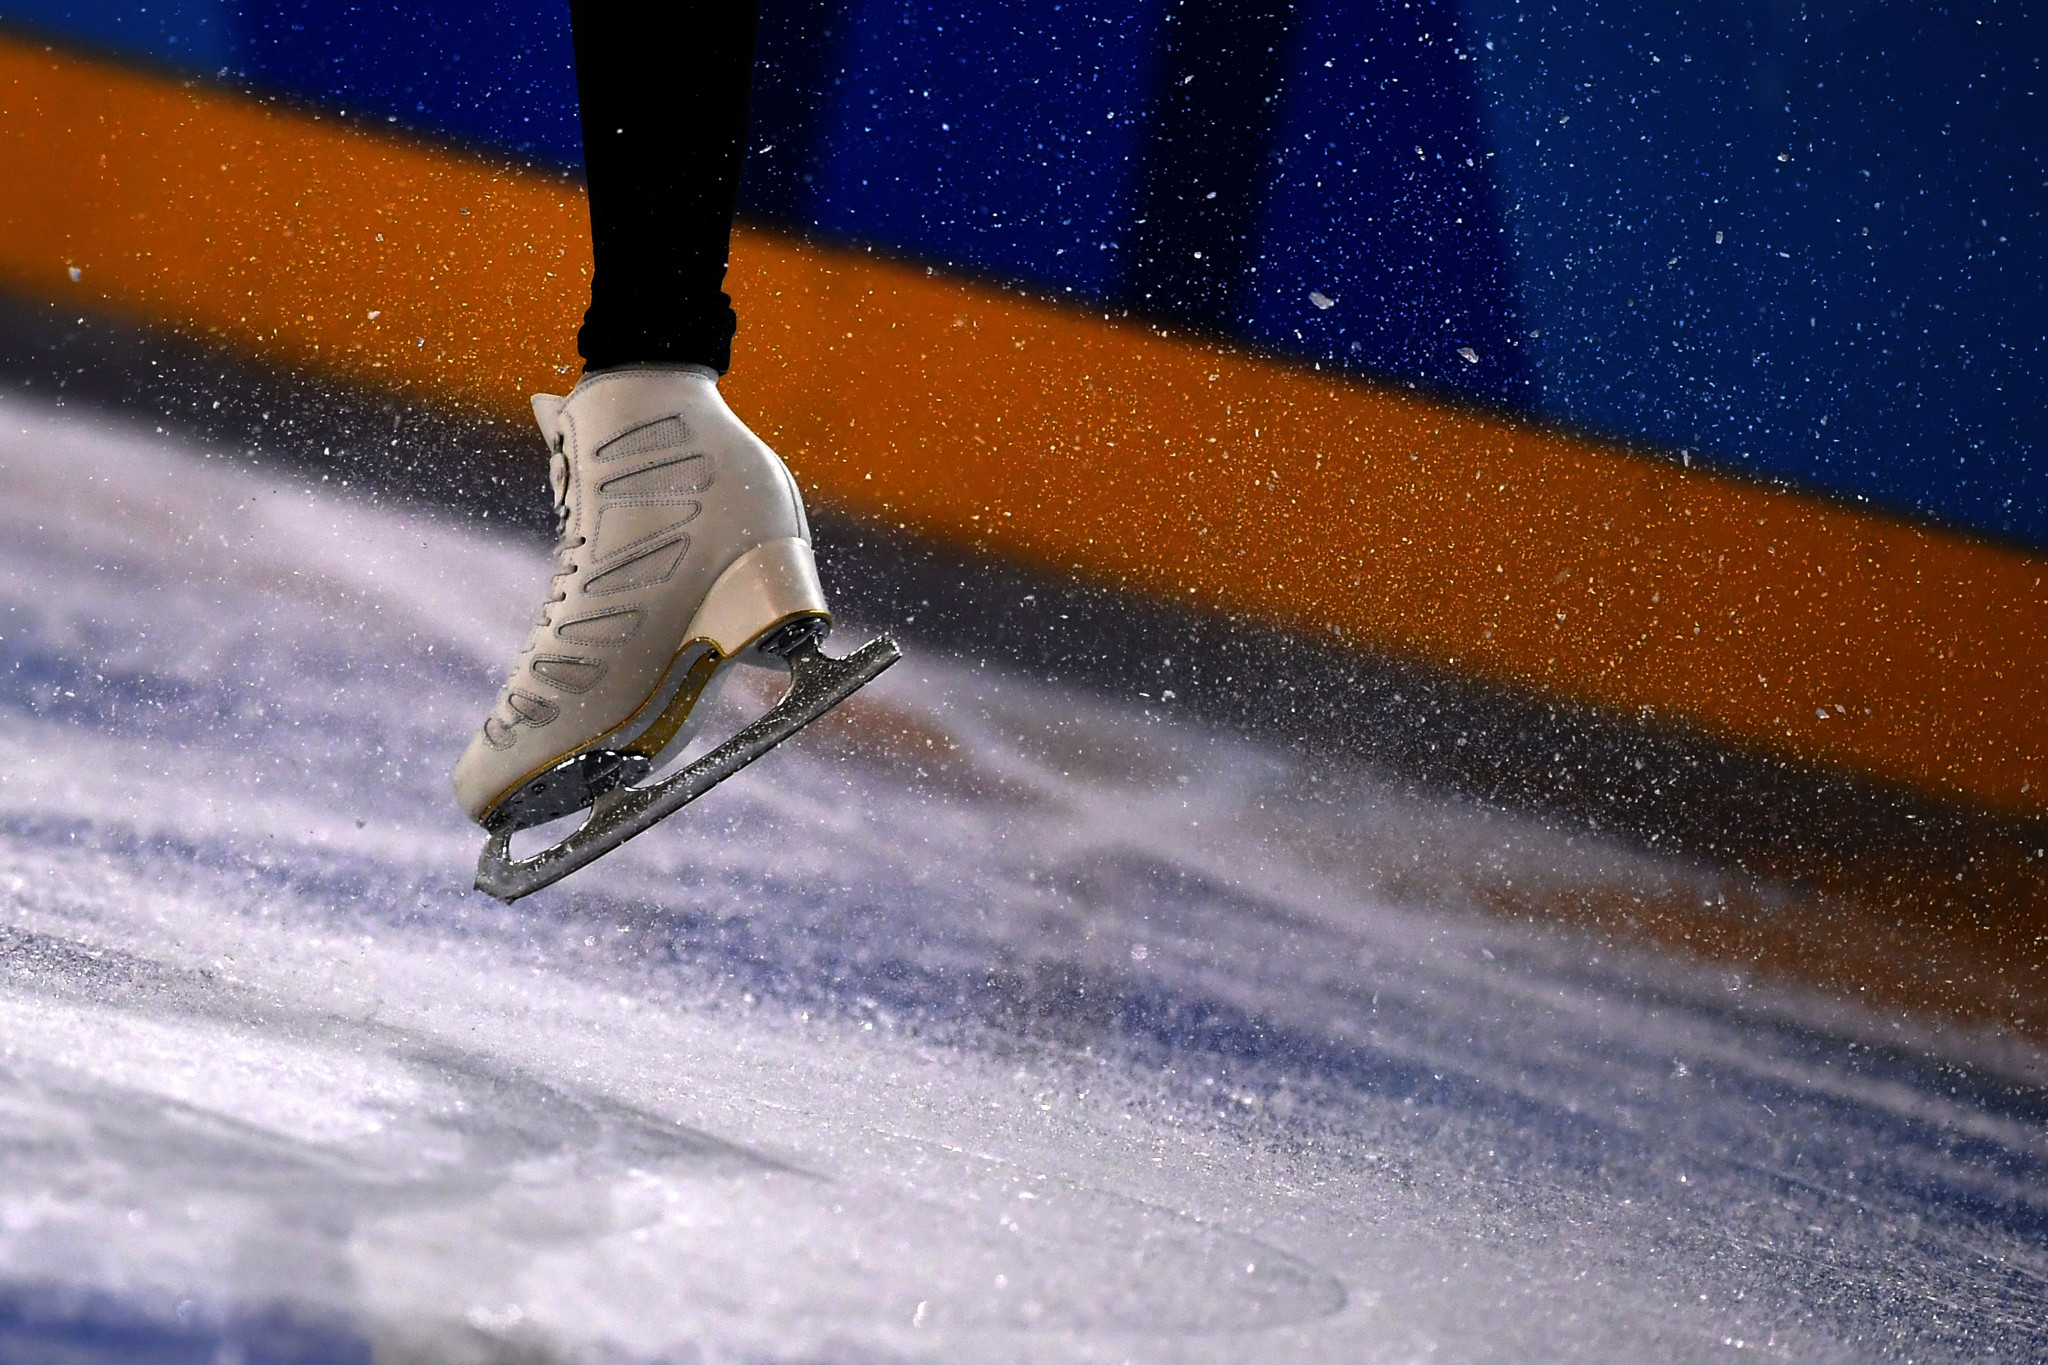 First World Ice Skating Day features events in 45 countries